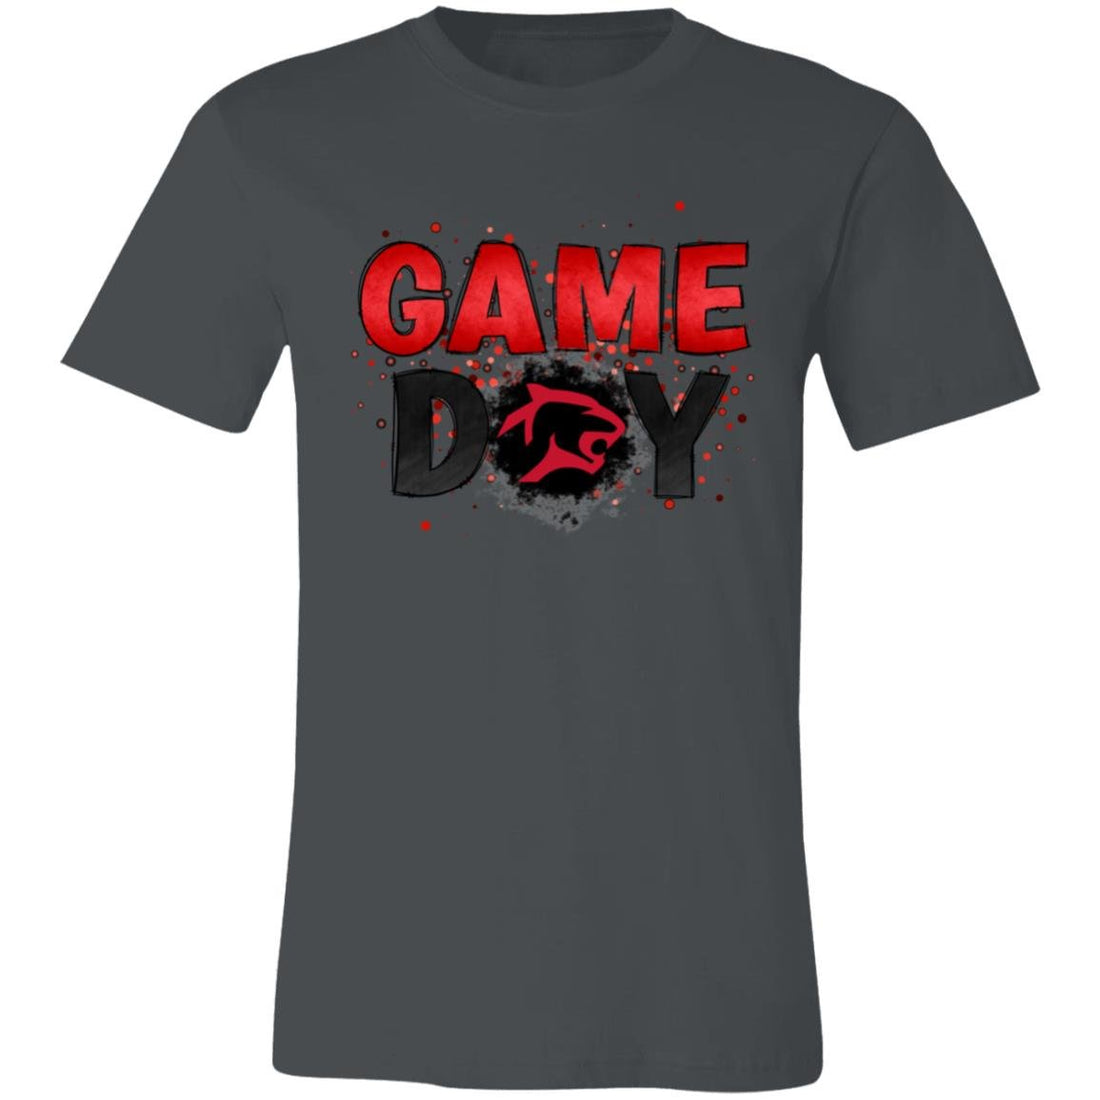 Panthers Game Day Short-Sleeve T-Shirt - T-Shirts - Positively Sassy - Panthers Game Day Short-Sleeve T-Shirt